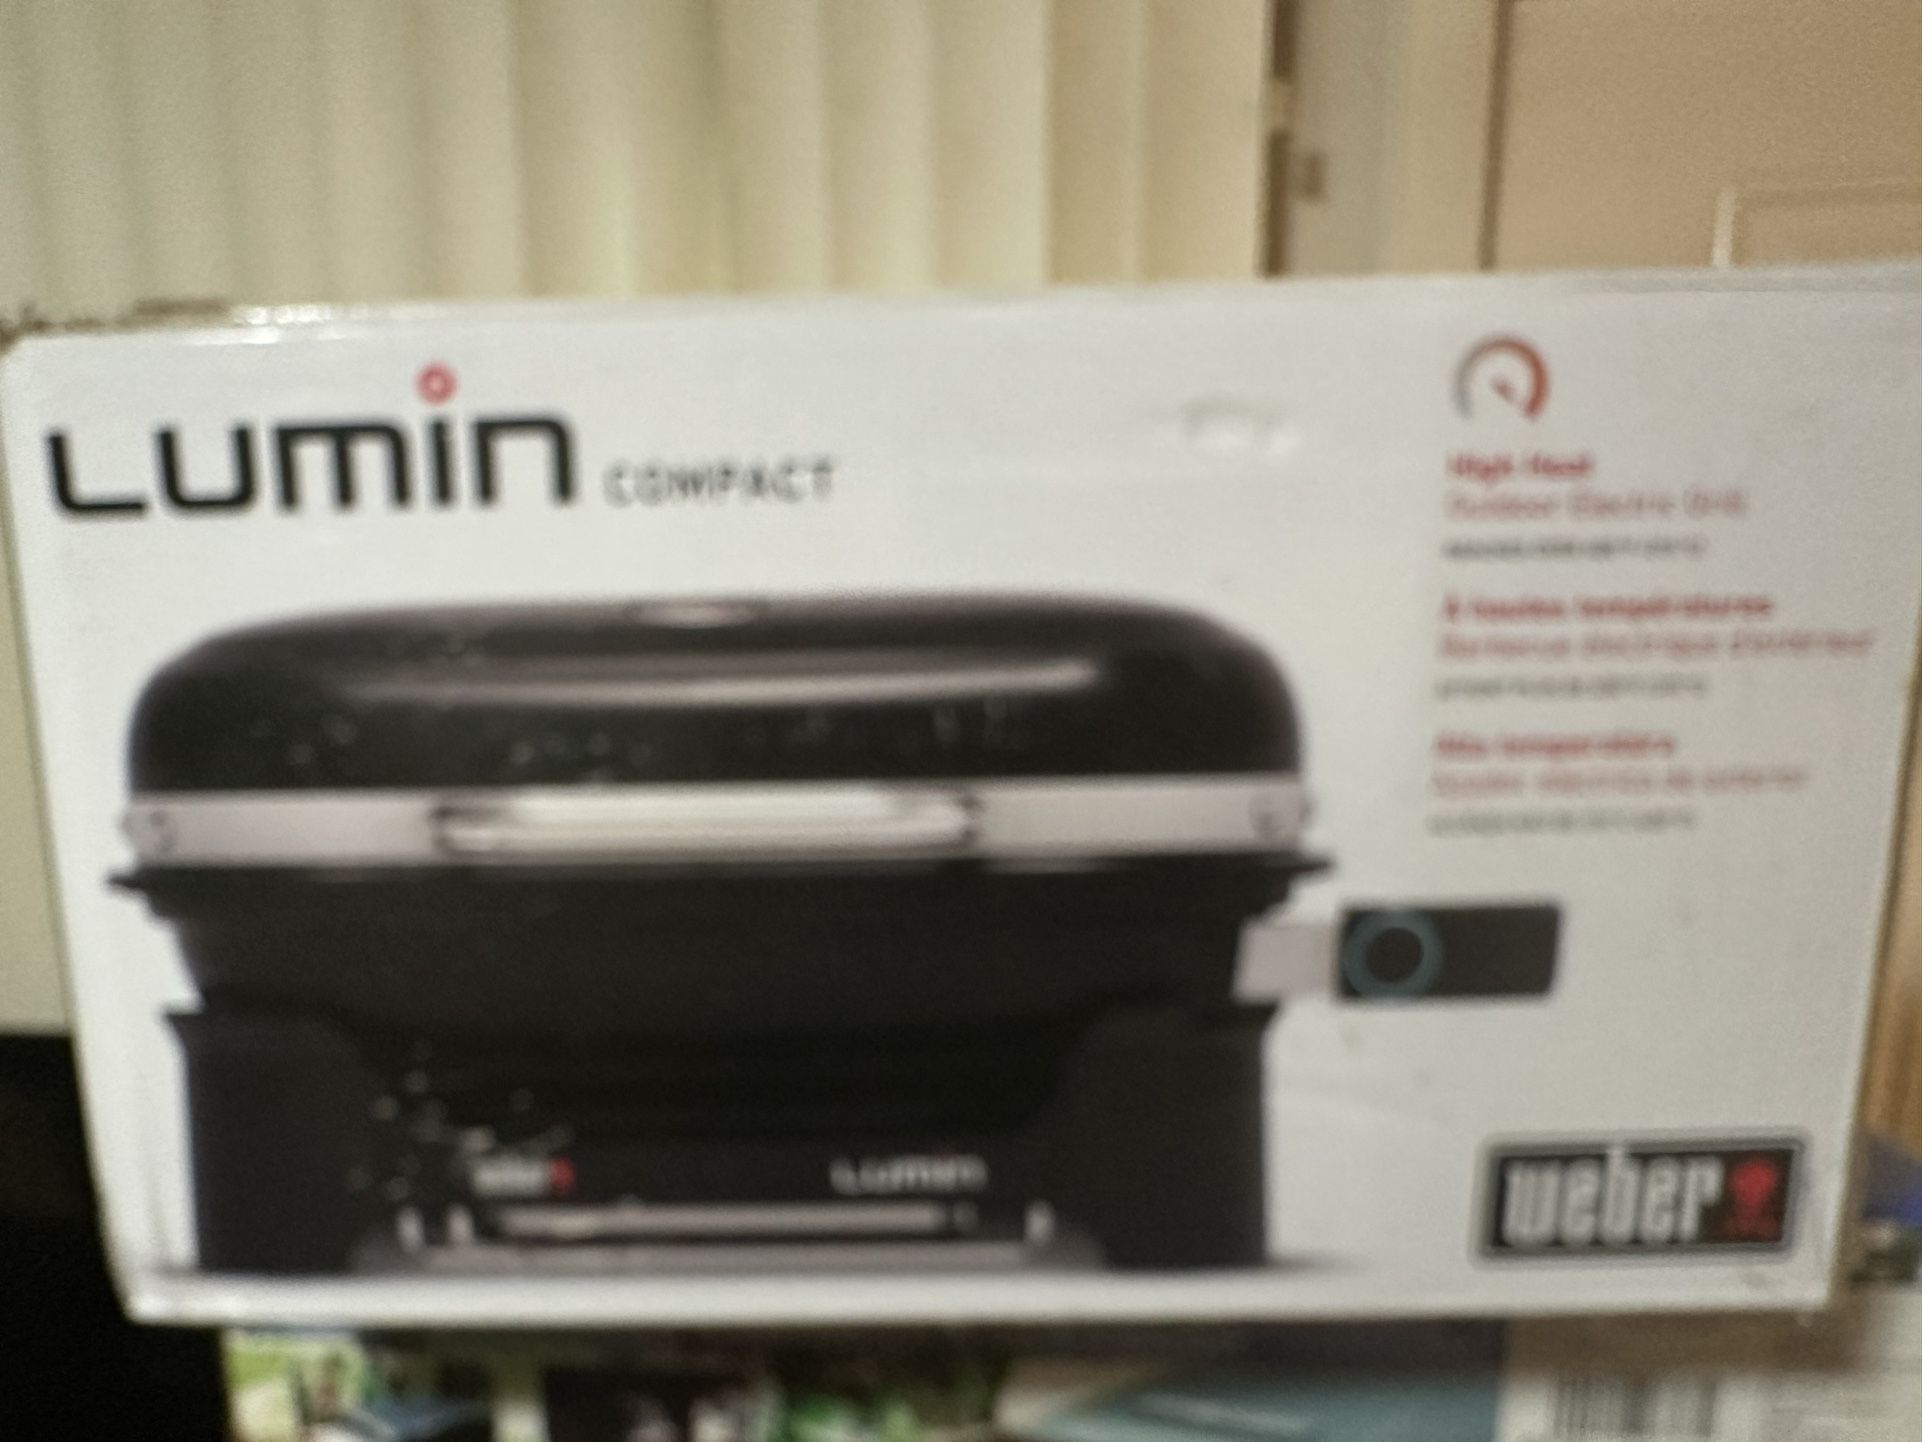 Lumin Compact Portable Electric BBQ Grill - Brand New Never Used Reducing Price For Quick Sale!!